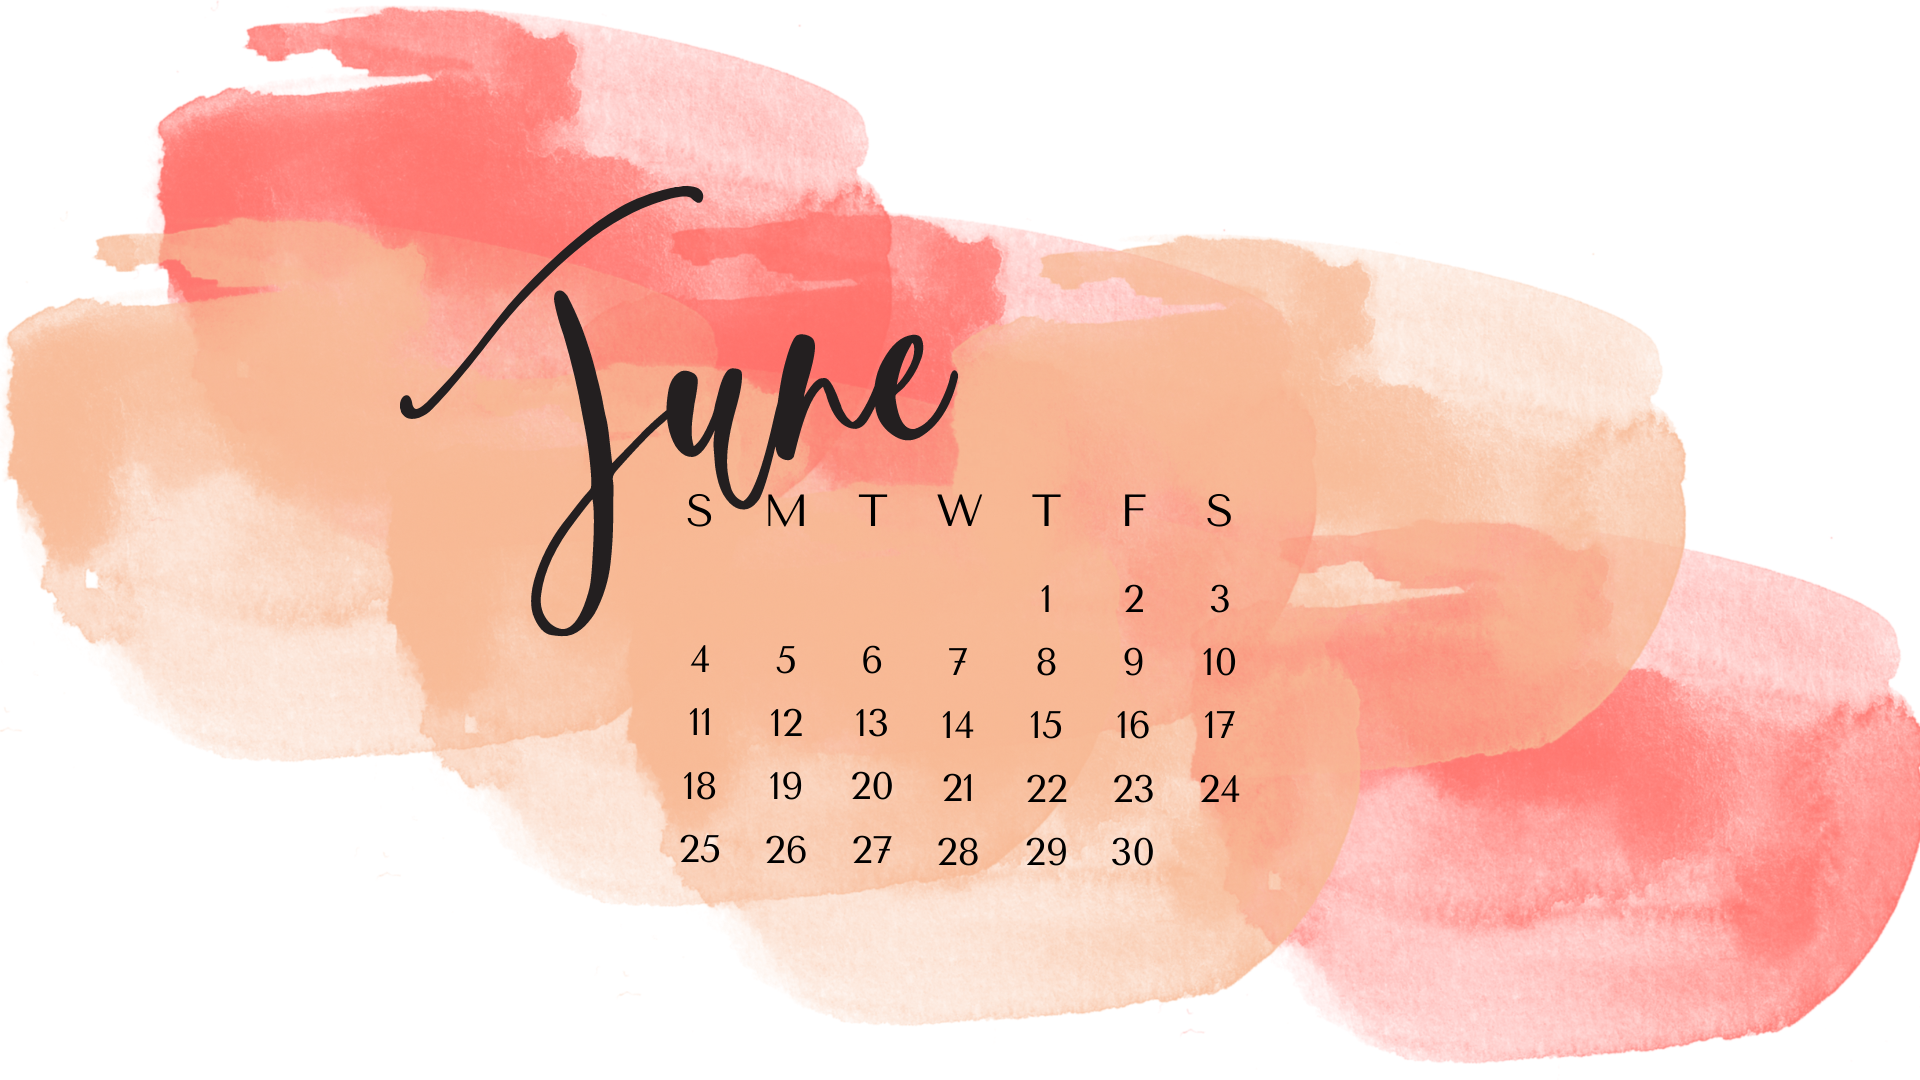 JUNE 2023 desktop calendar backgrounds;  Here are your free June backgrounds for computers and laptops. Tech freebies for this month!